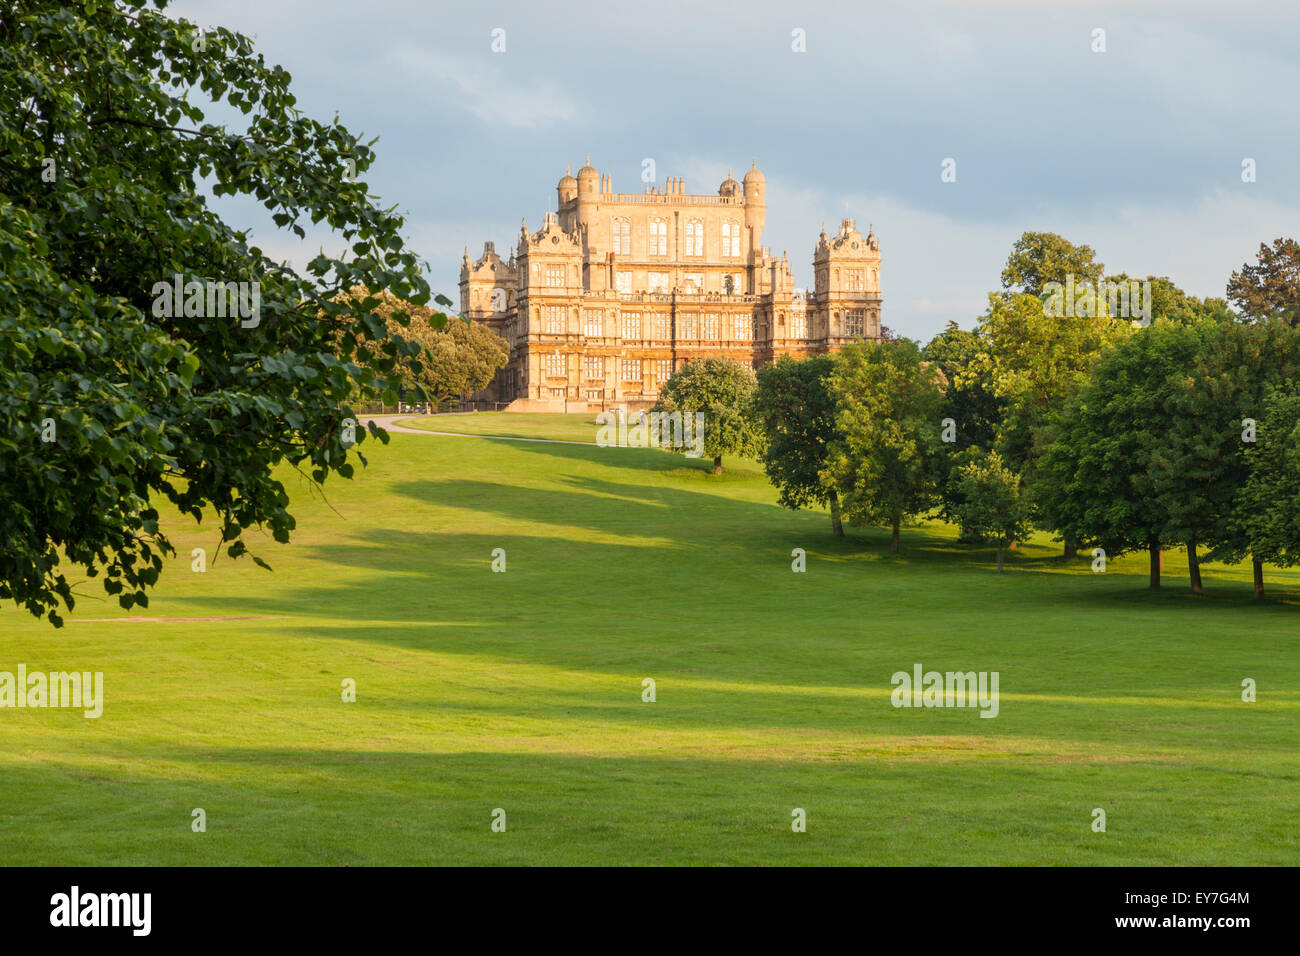 Wollaton Hall standing on a hill within Wollaton Park in Wollaton, Nottingham, England, UK Stock Photo